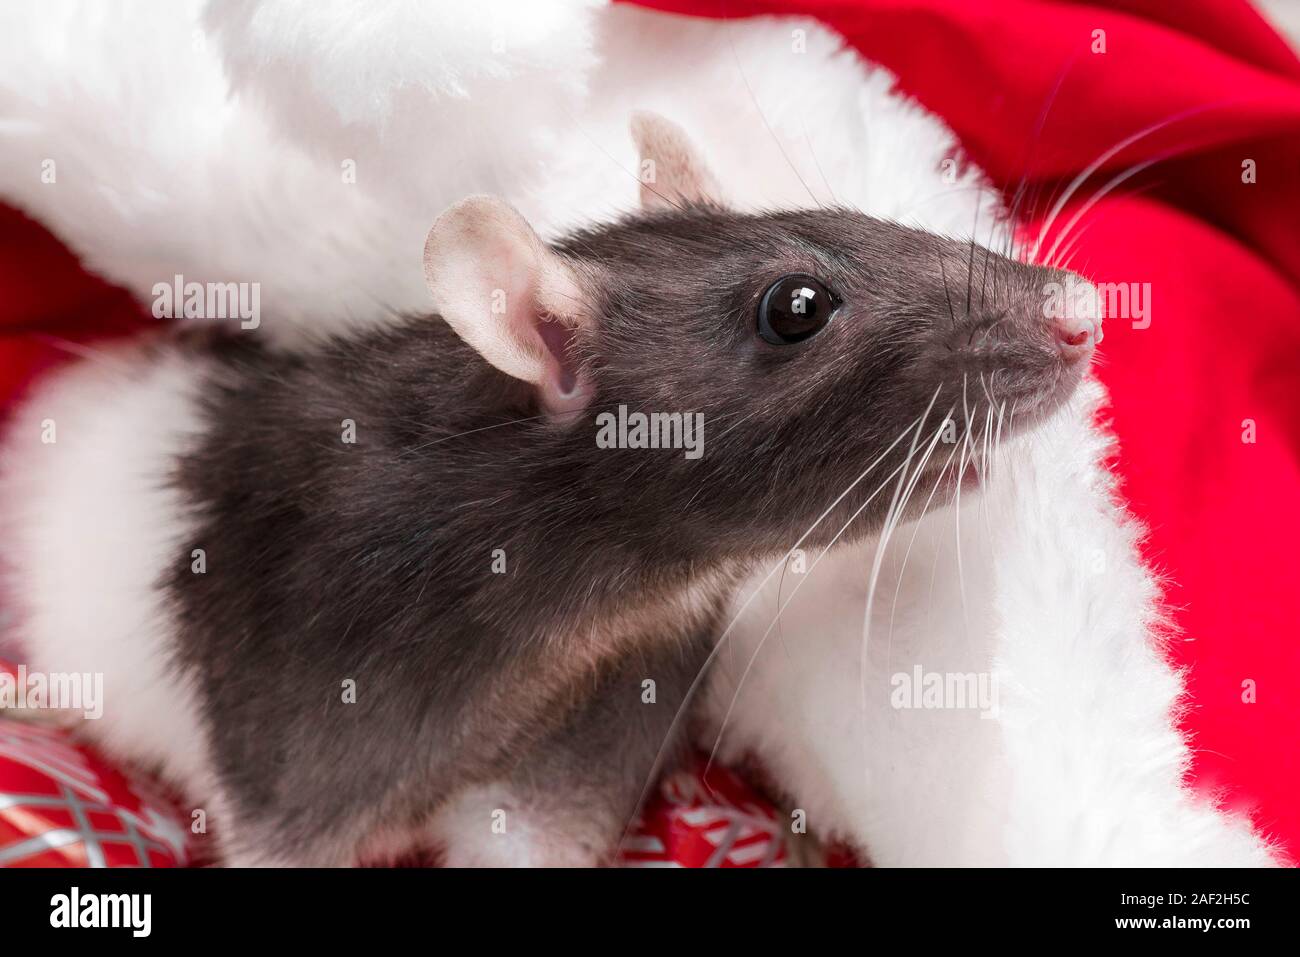 Year of the cute rat.Cute rat sitting in Santa's hat close up.Cute domestic rat in a New Year's decor. Symbol of the year 2020 is a rat. Stock Photo